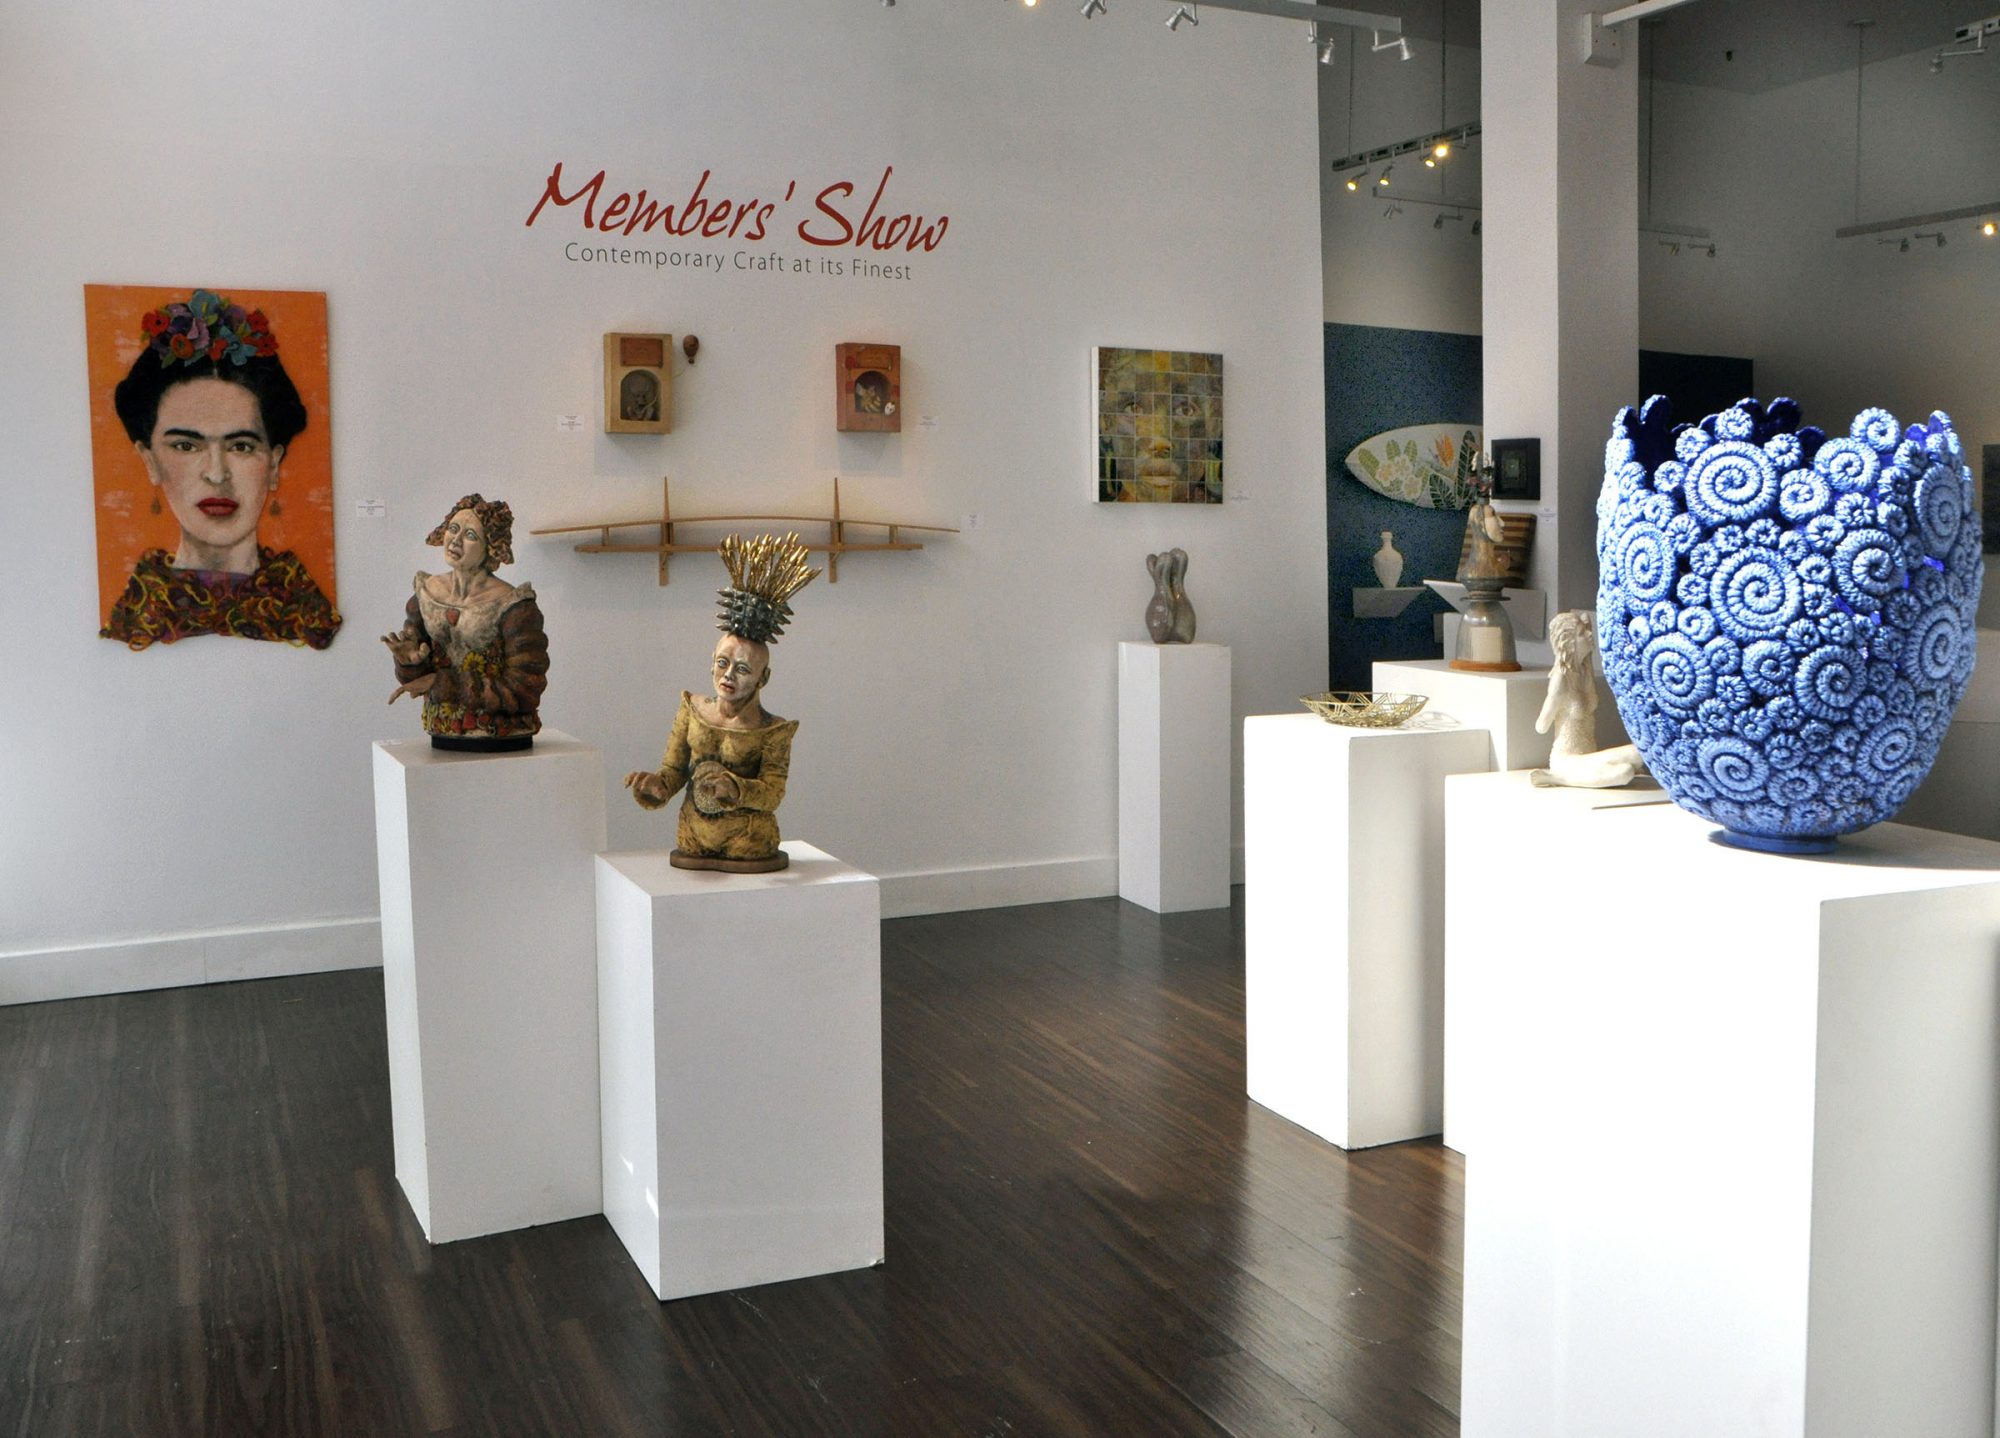 Members’ Show: Contemporary Craft at its Finest